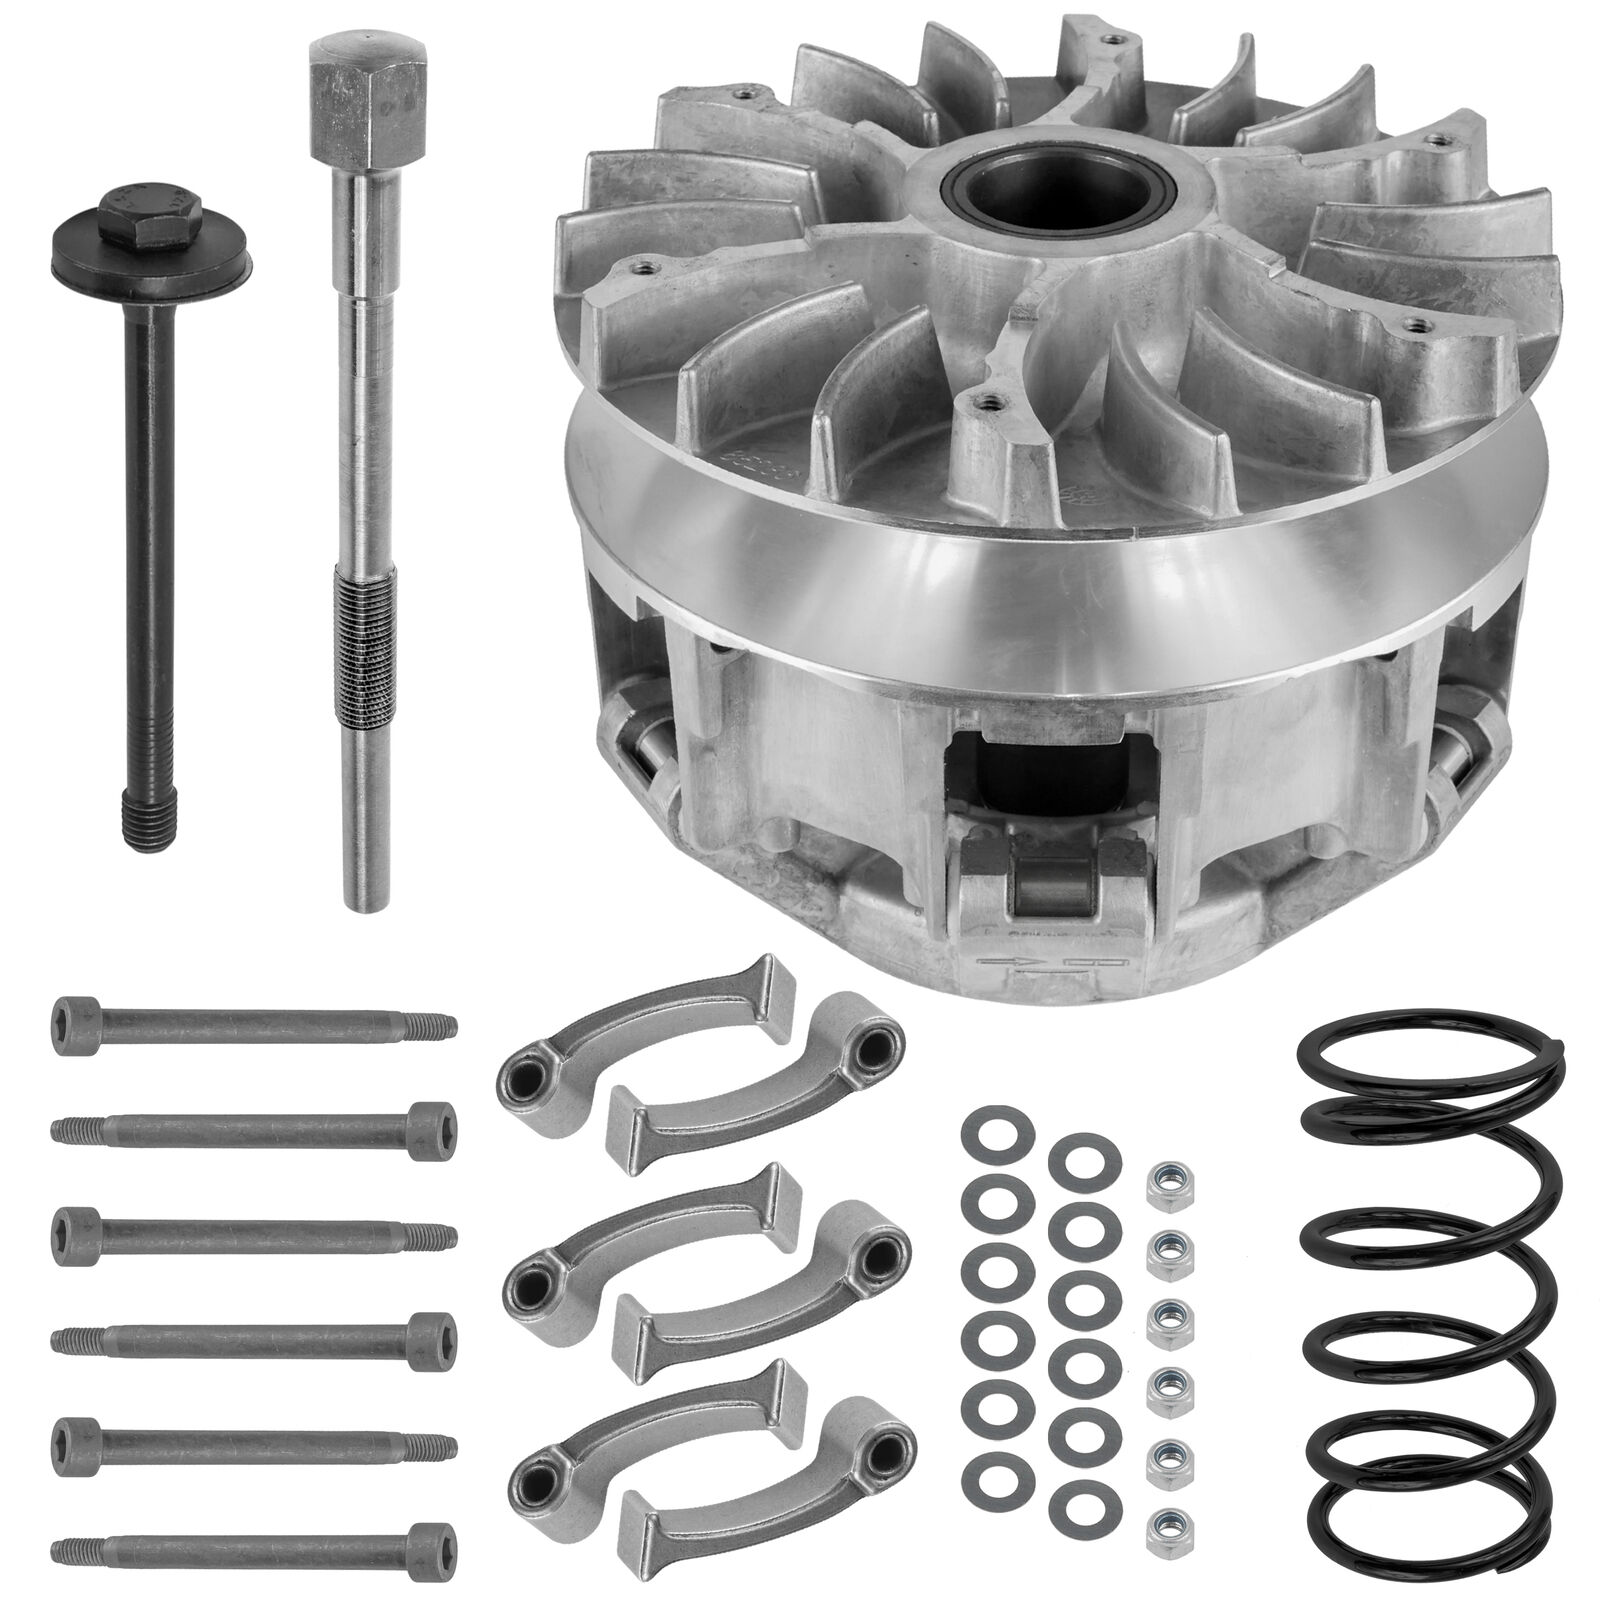 Primary Drive Clutch w/ Weight Spring for BRP Can-Am Renegade 1000 EFI 2012-2015